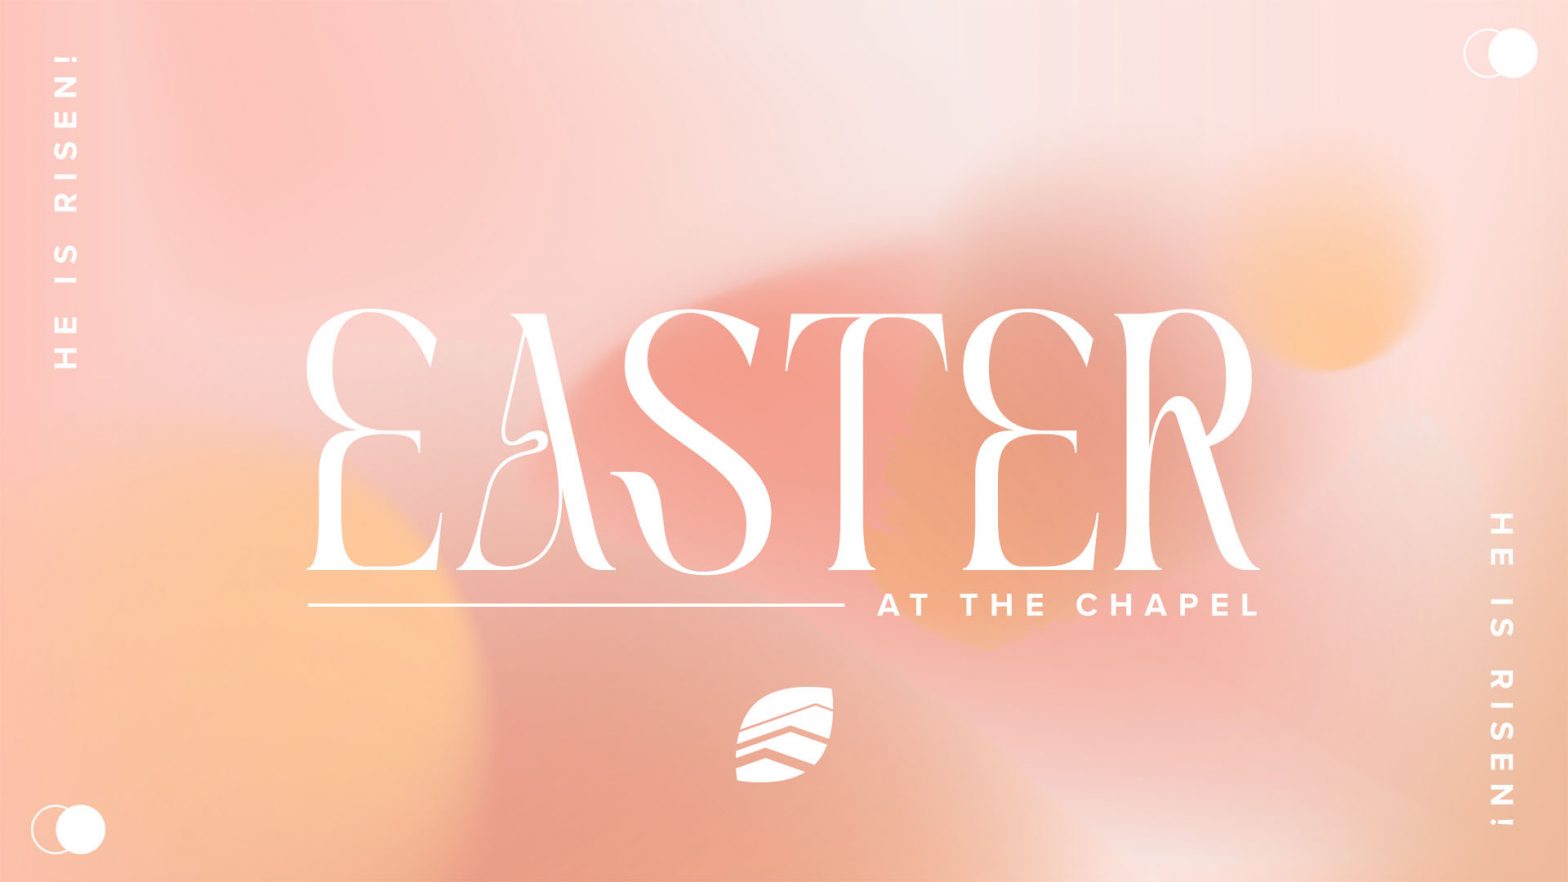 Easter at The Chapel